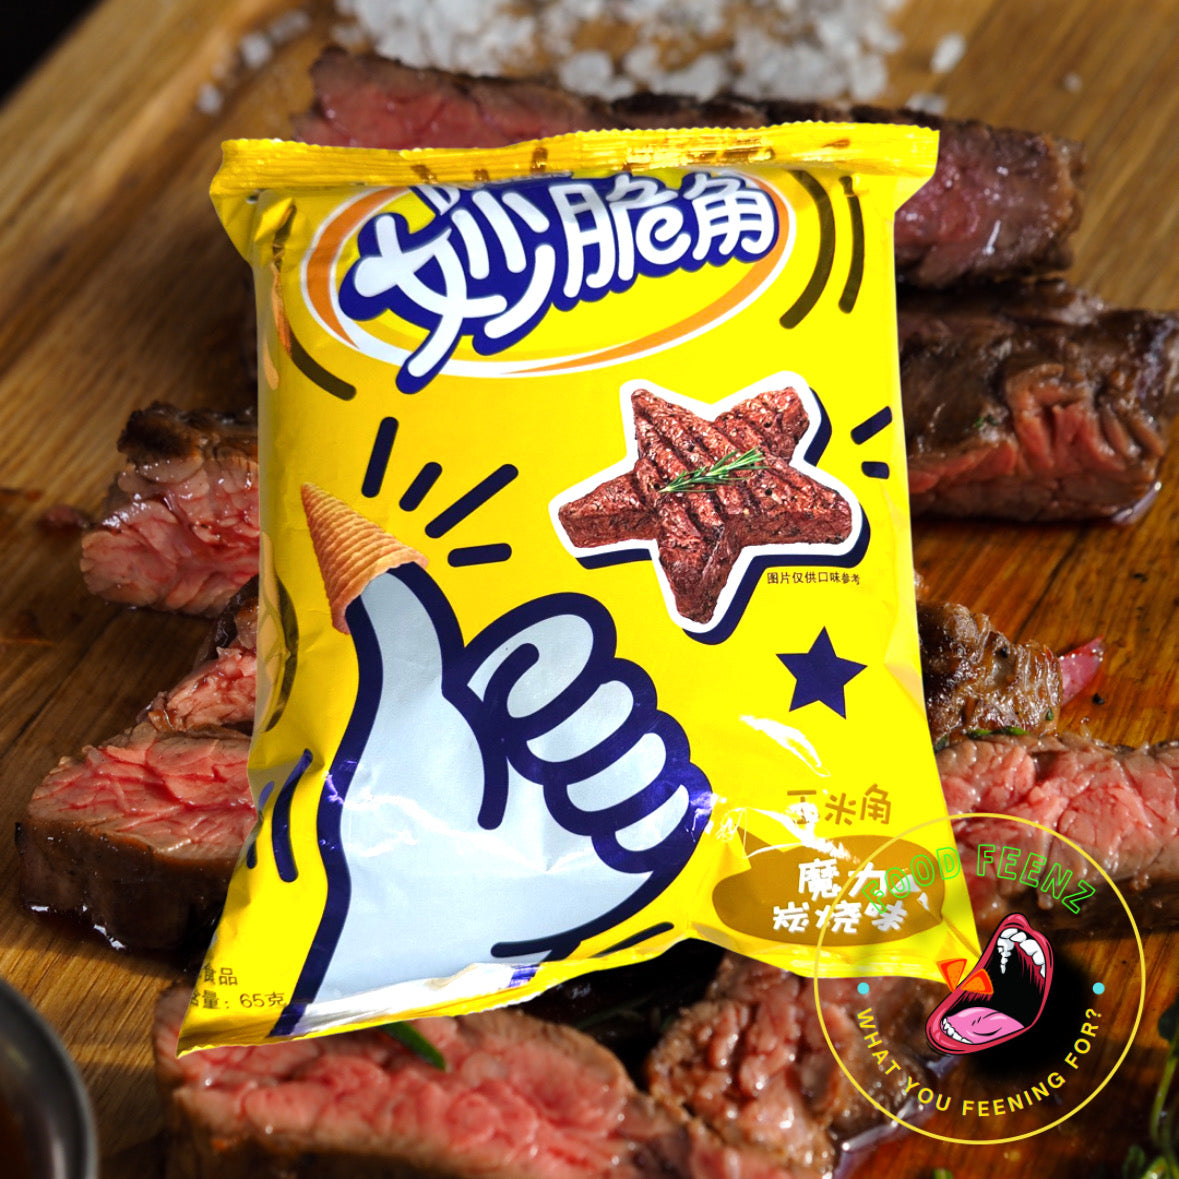 Cheetos Bugles Grilled Charcoal Steak Flavor (China)